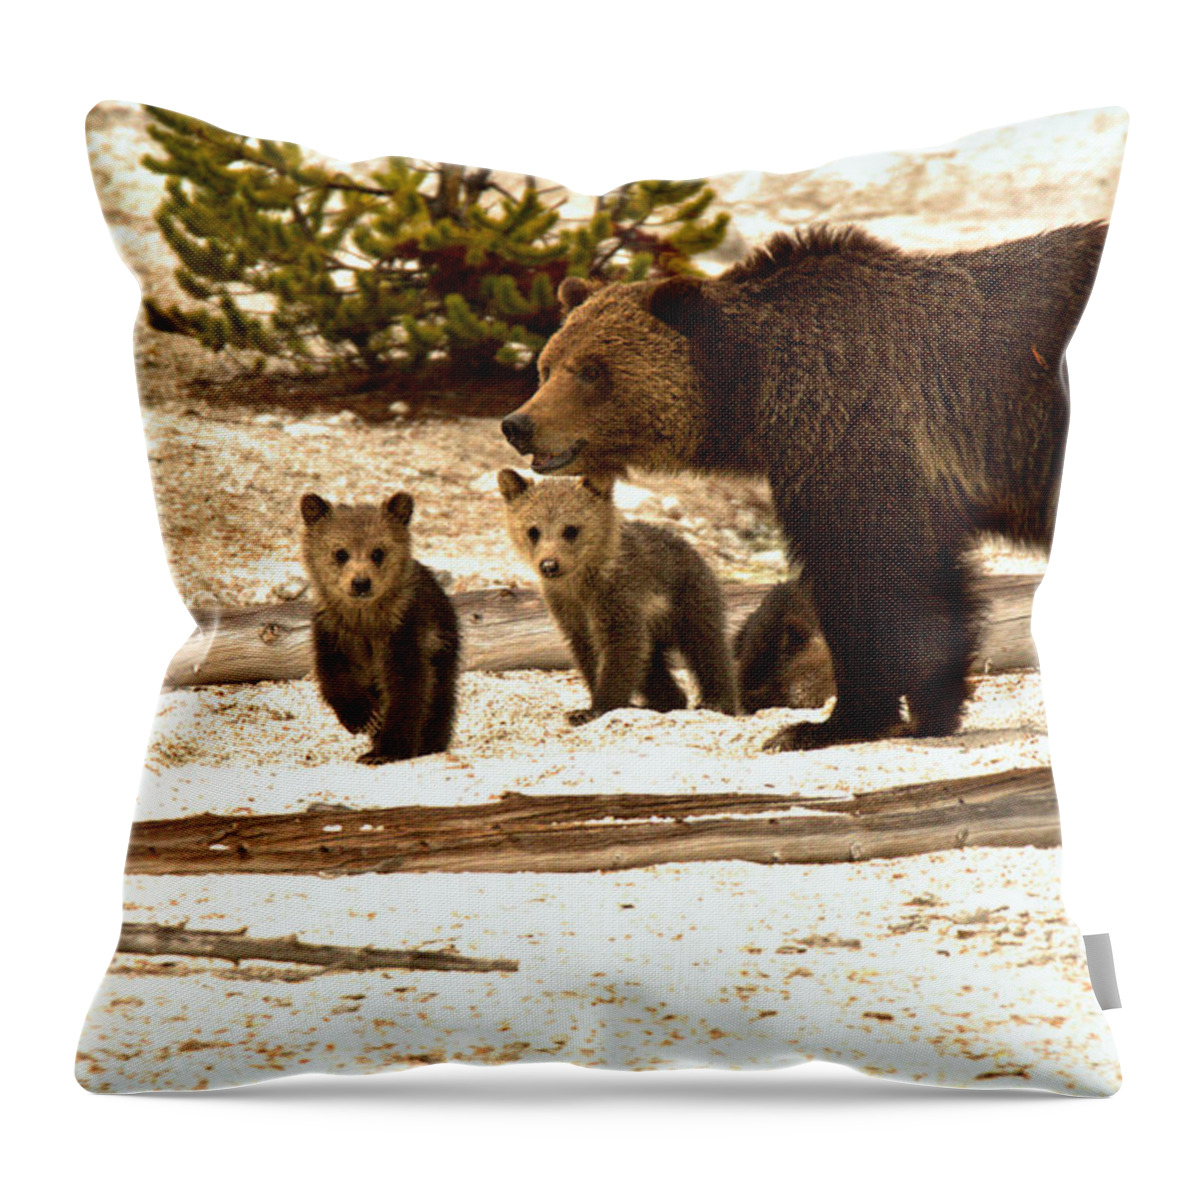 Grizly Bear Throw Pillow featuring the photograph Playful Grizzly Bear Family At Roaring Mountain by Adam Jewell